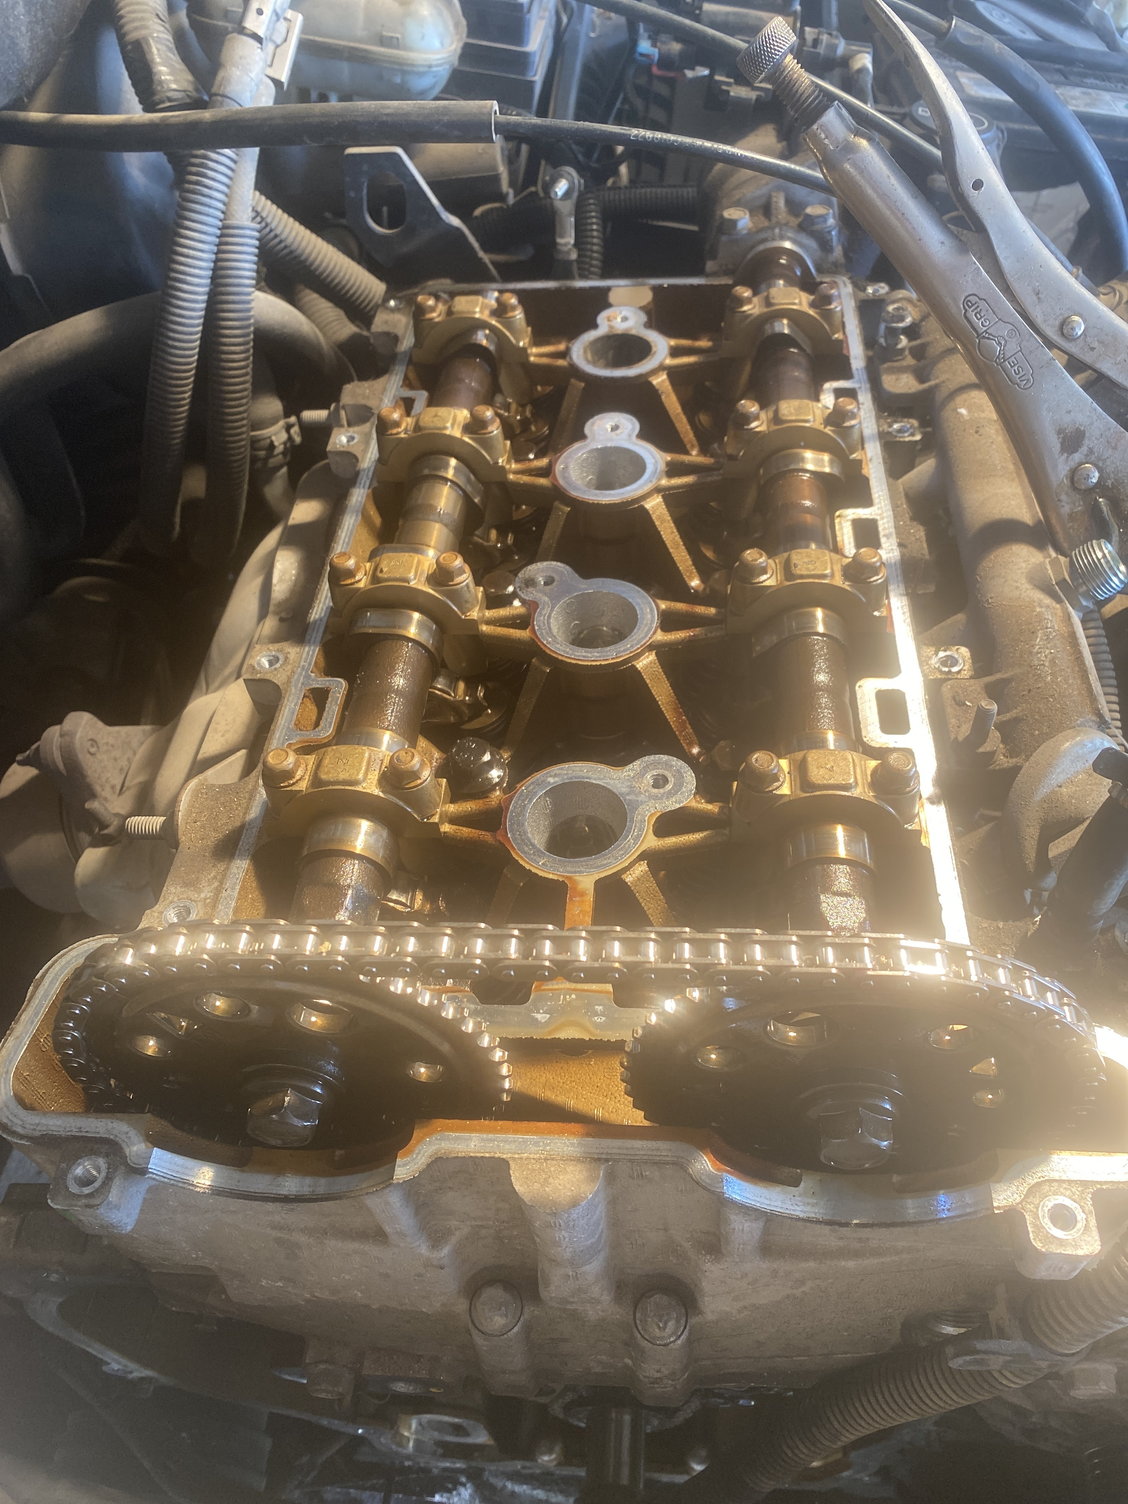 2008 chevy malibu timing chain replacement cost